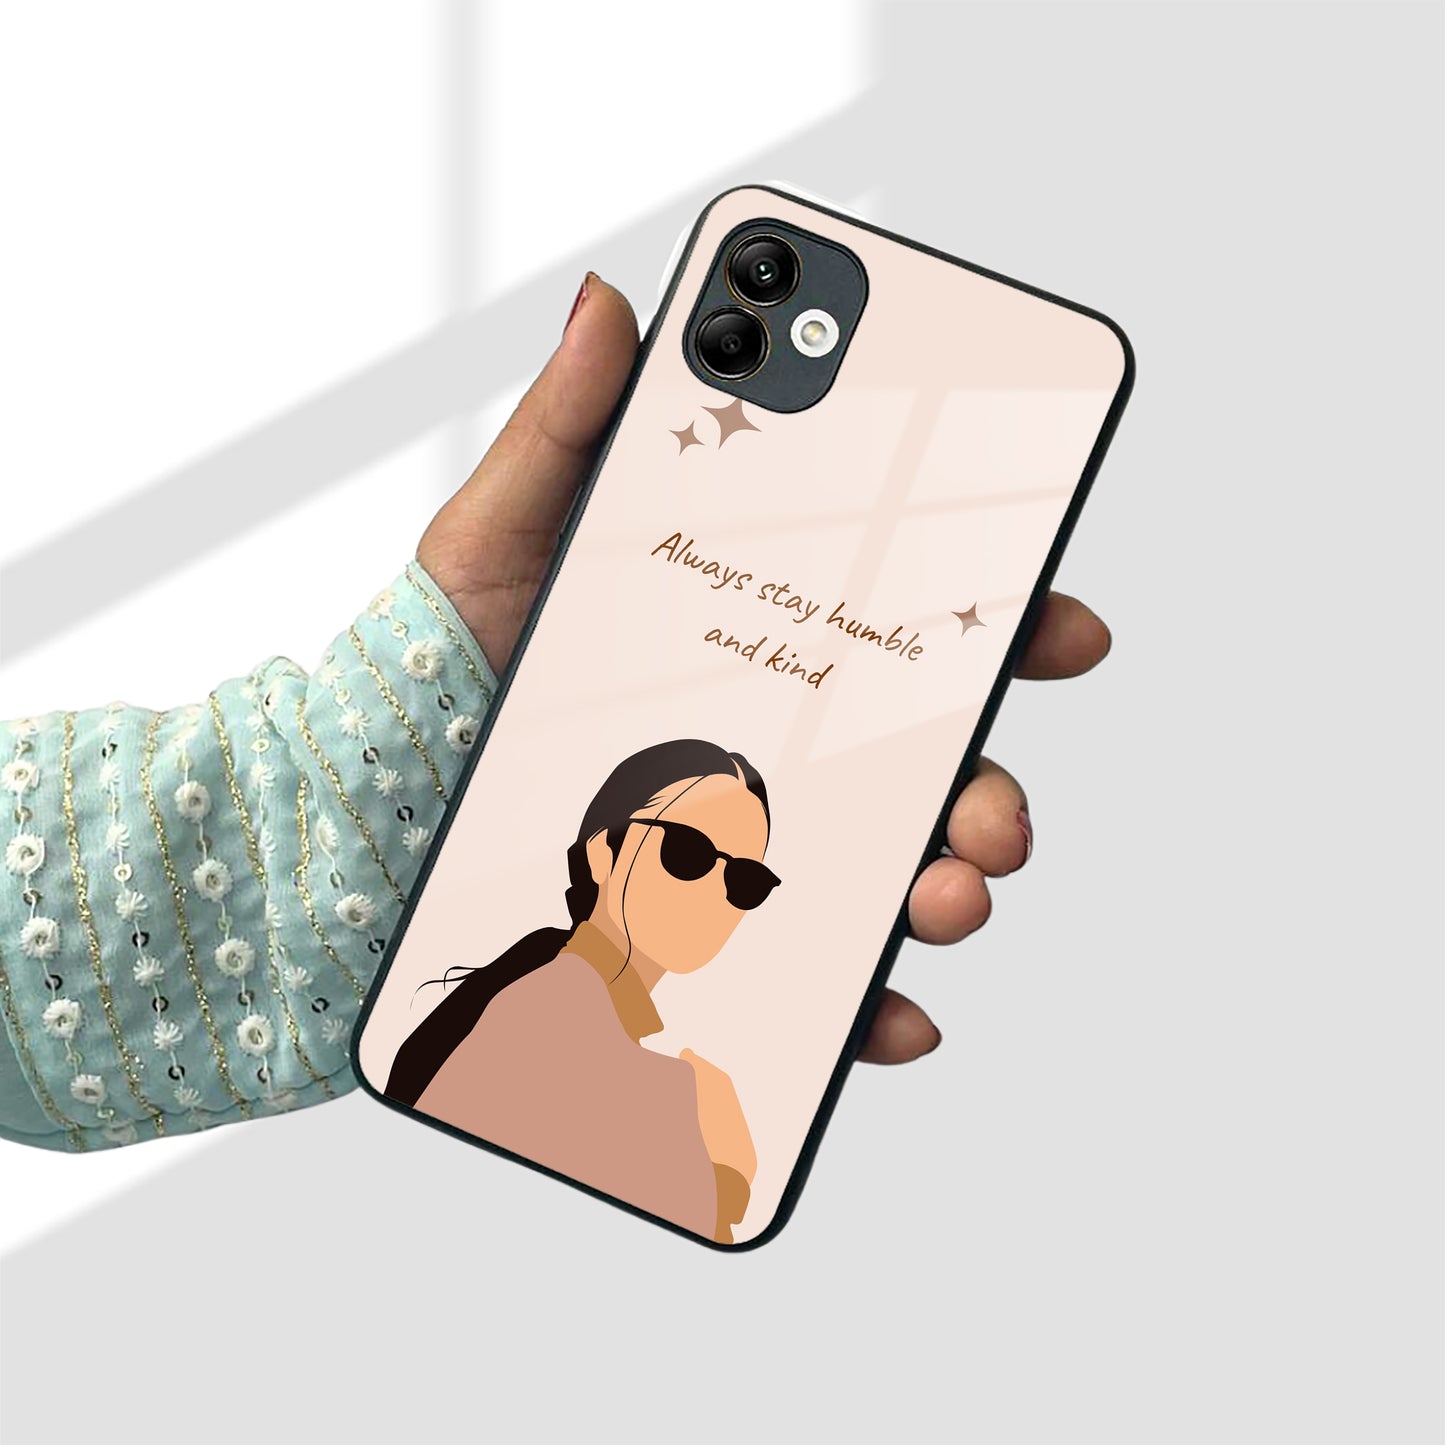 Always Stay Humble And Kind Glass Phone Cover for Samsung